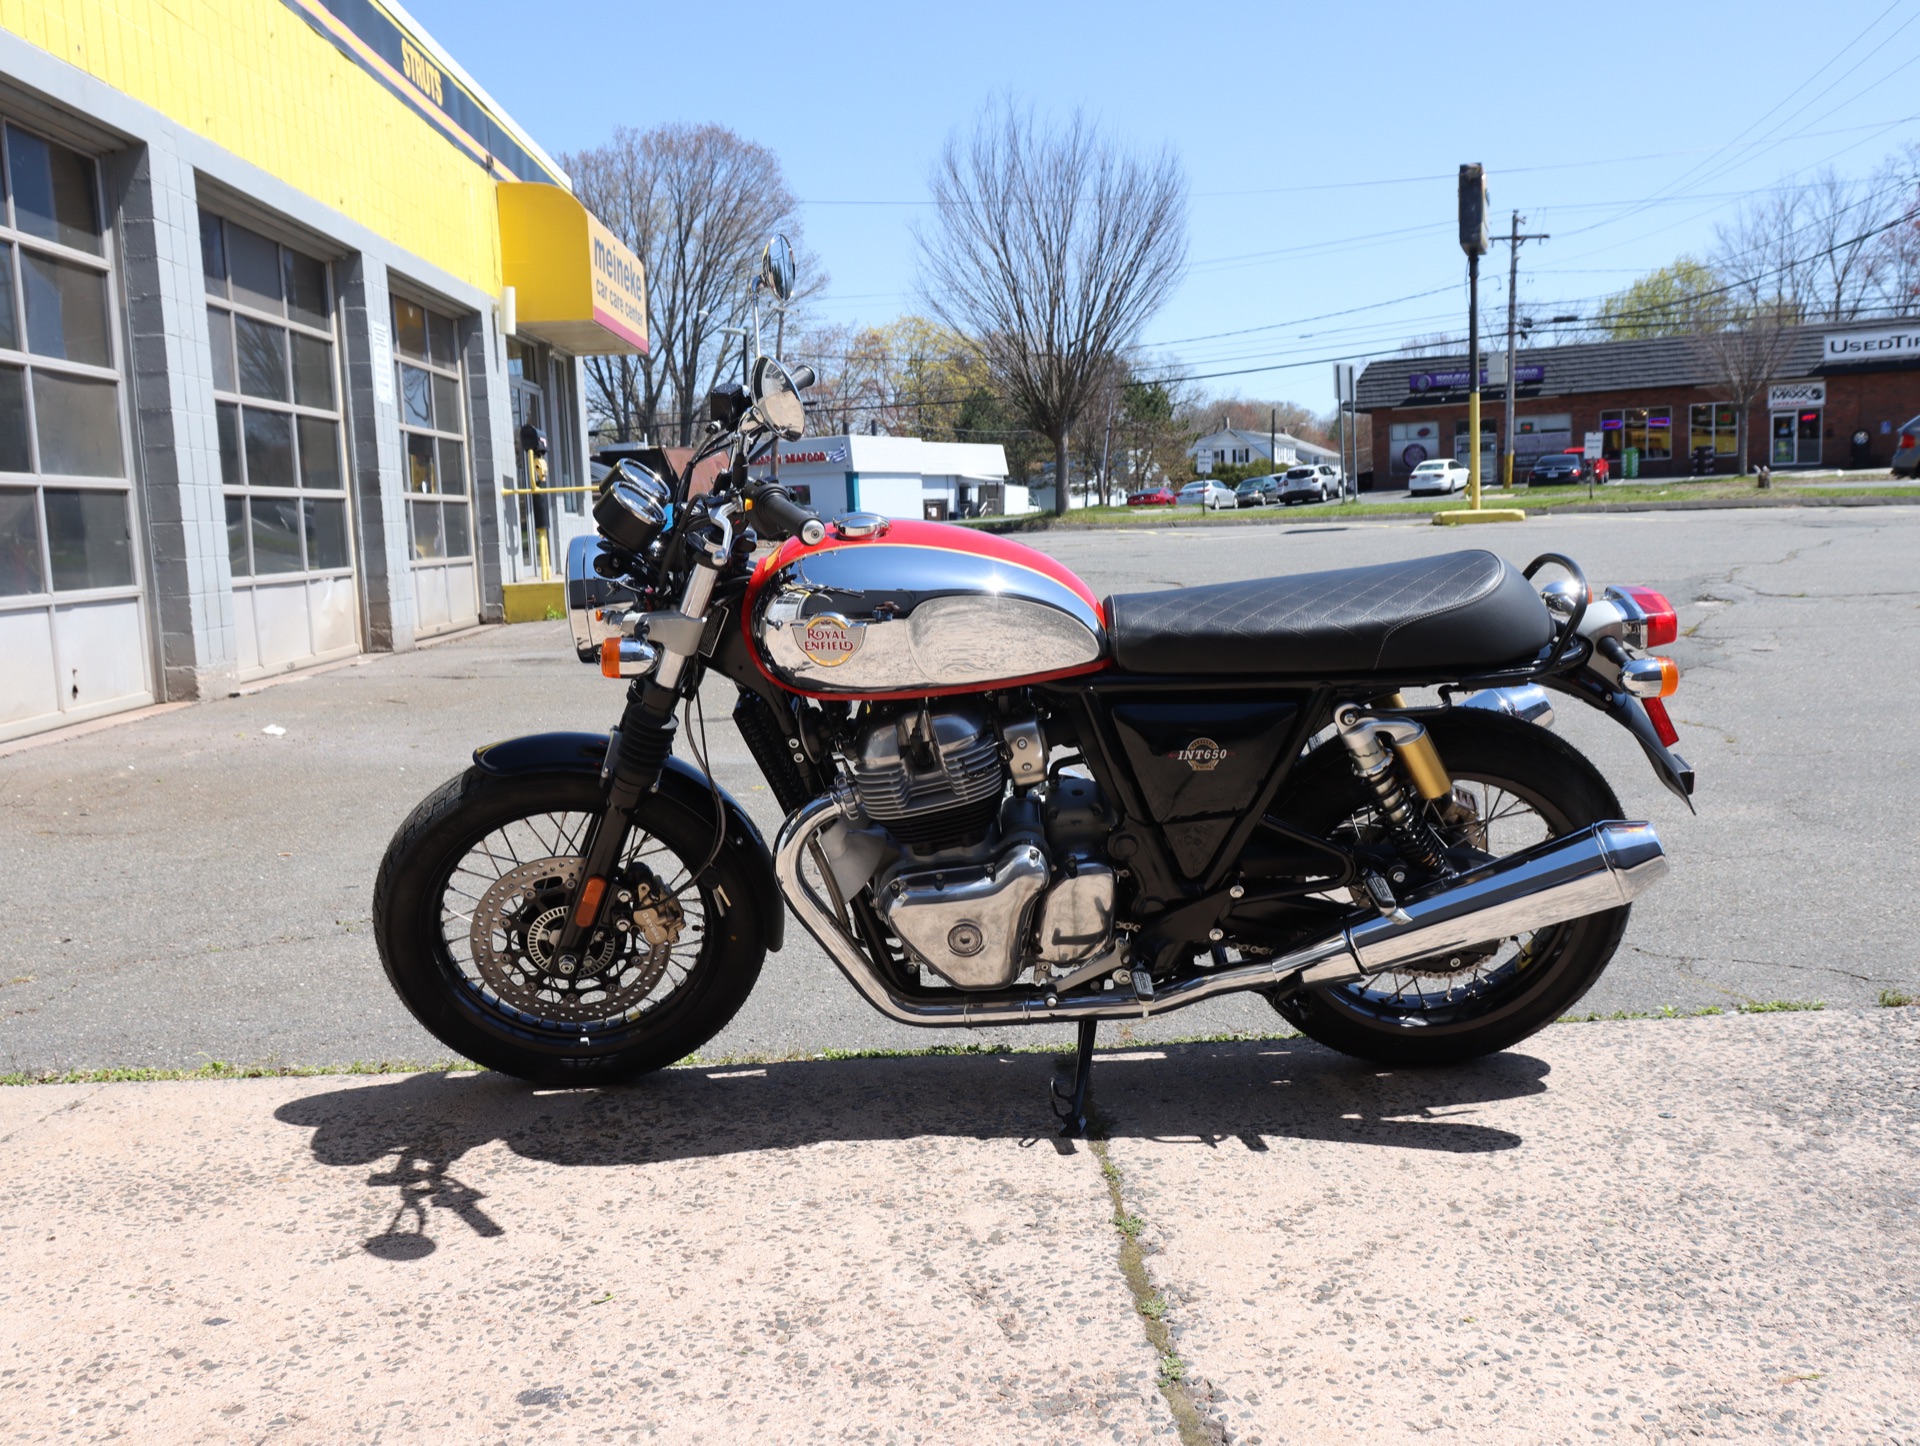 2022 Royal Enfield INT650 in Enfield, Connecticut - Photo 6